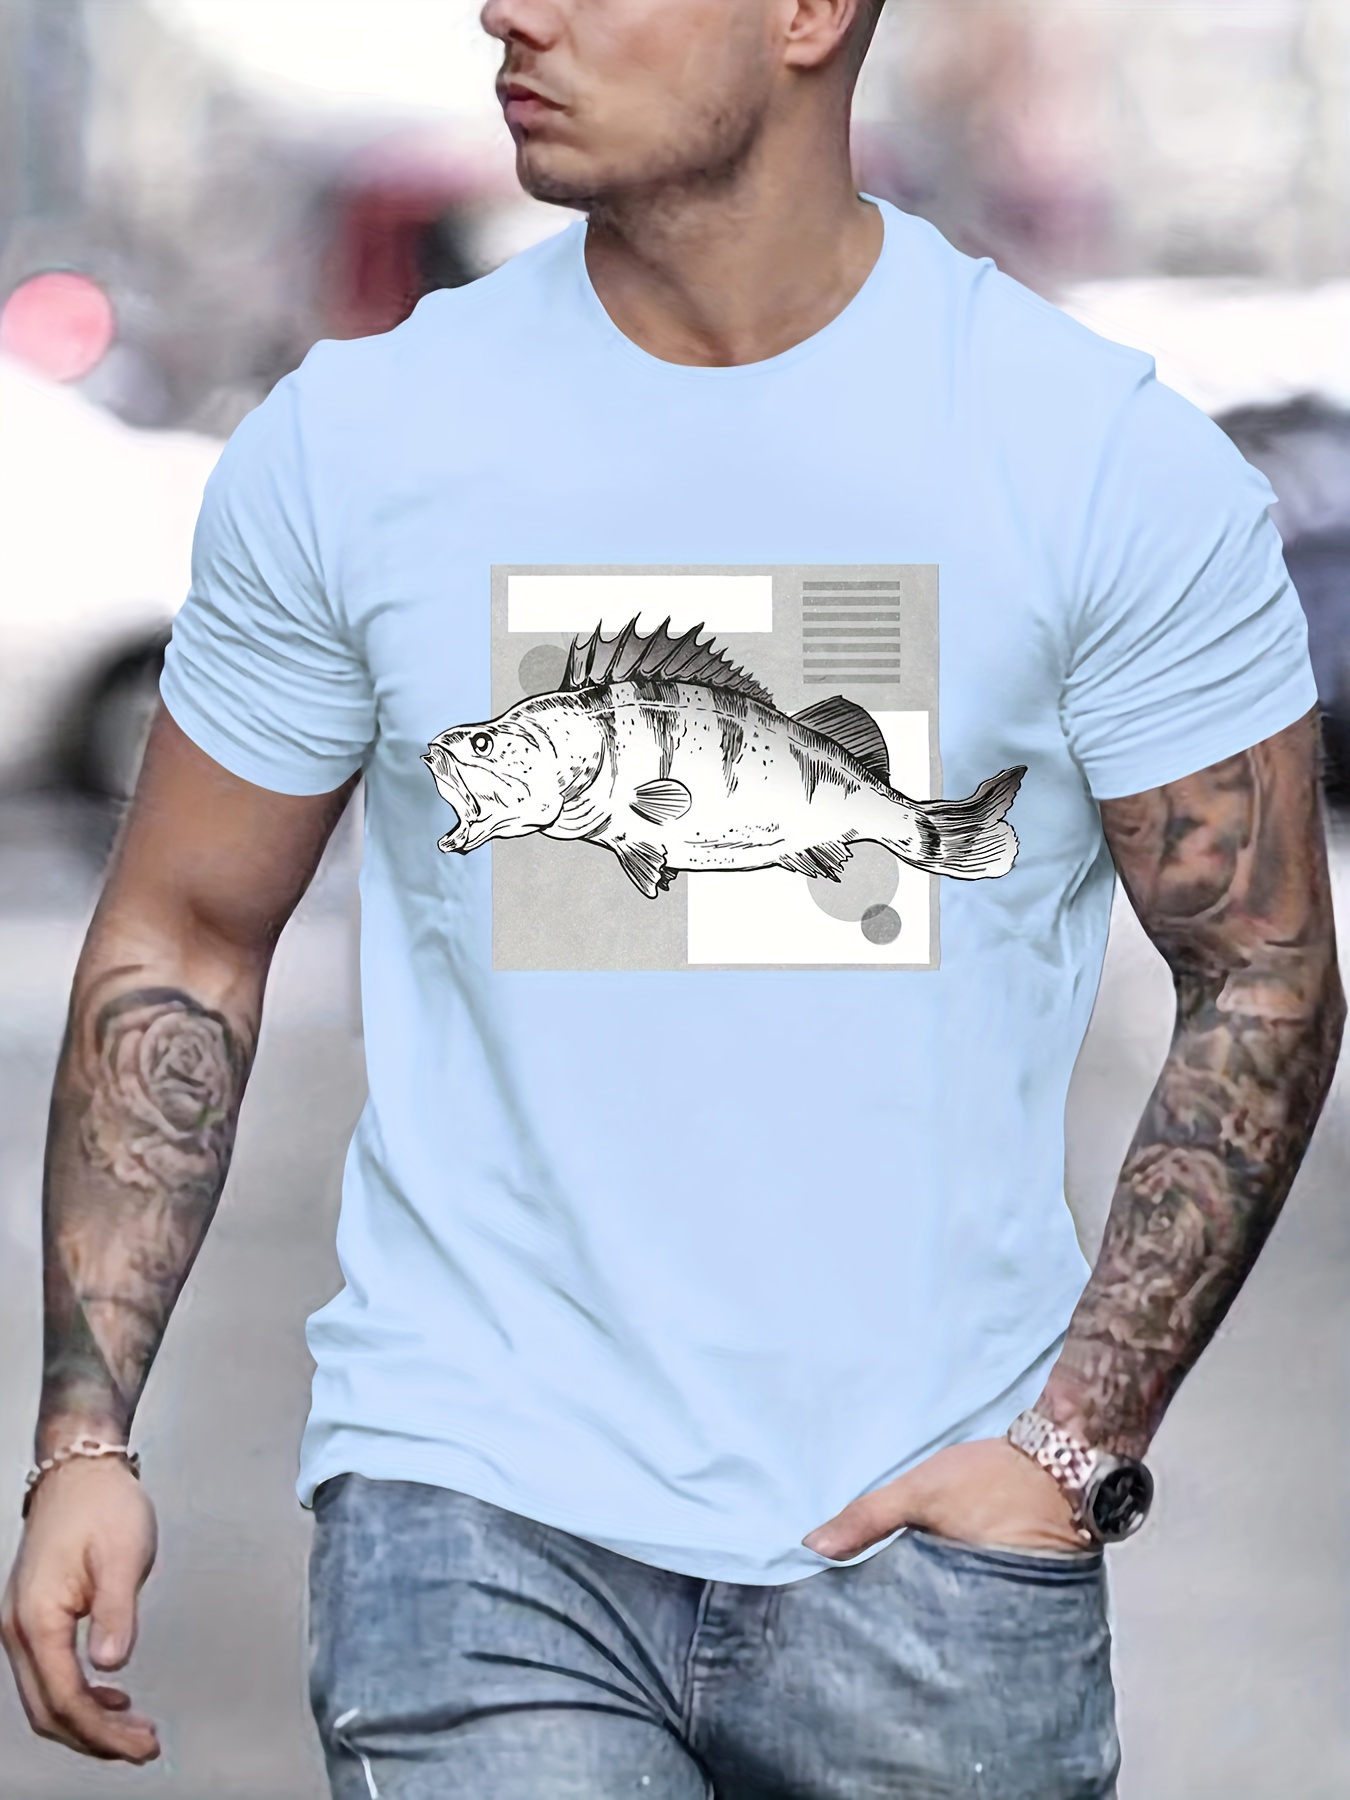 Solid Crew Neck Cotton T-shirt, Men's Stylish Summer Fish Pattern Print Comfy Graphic Tee Outdoor Clothes Clothing Gift For Men Tops,Lake Blue